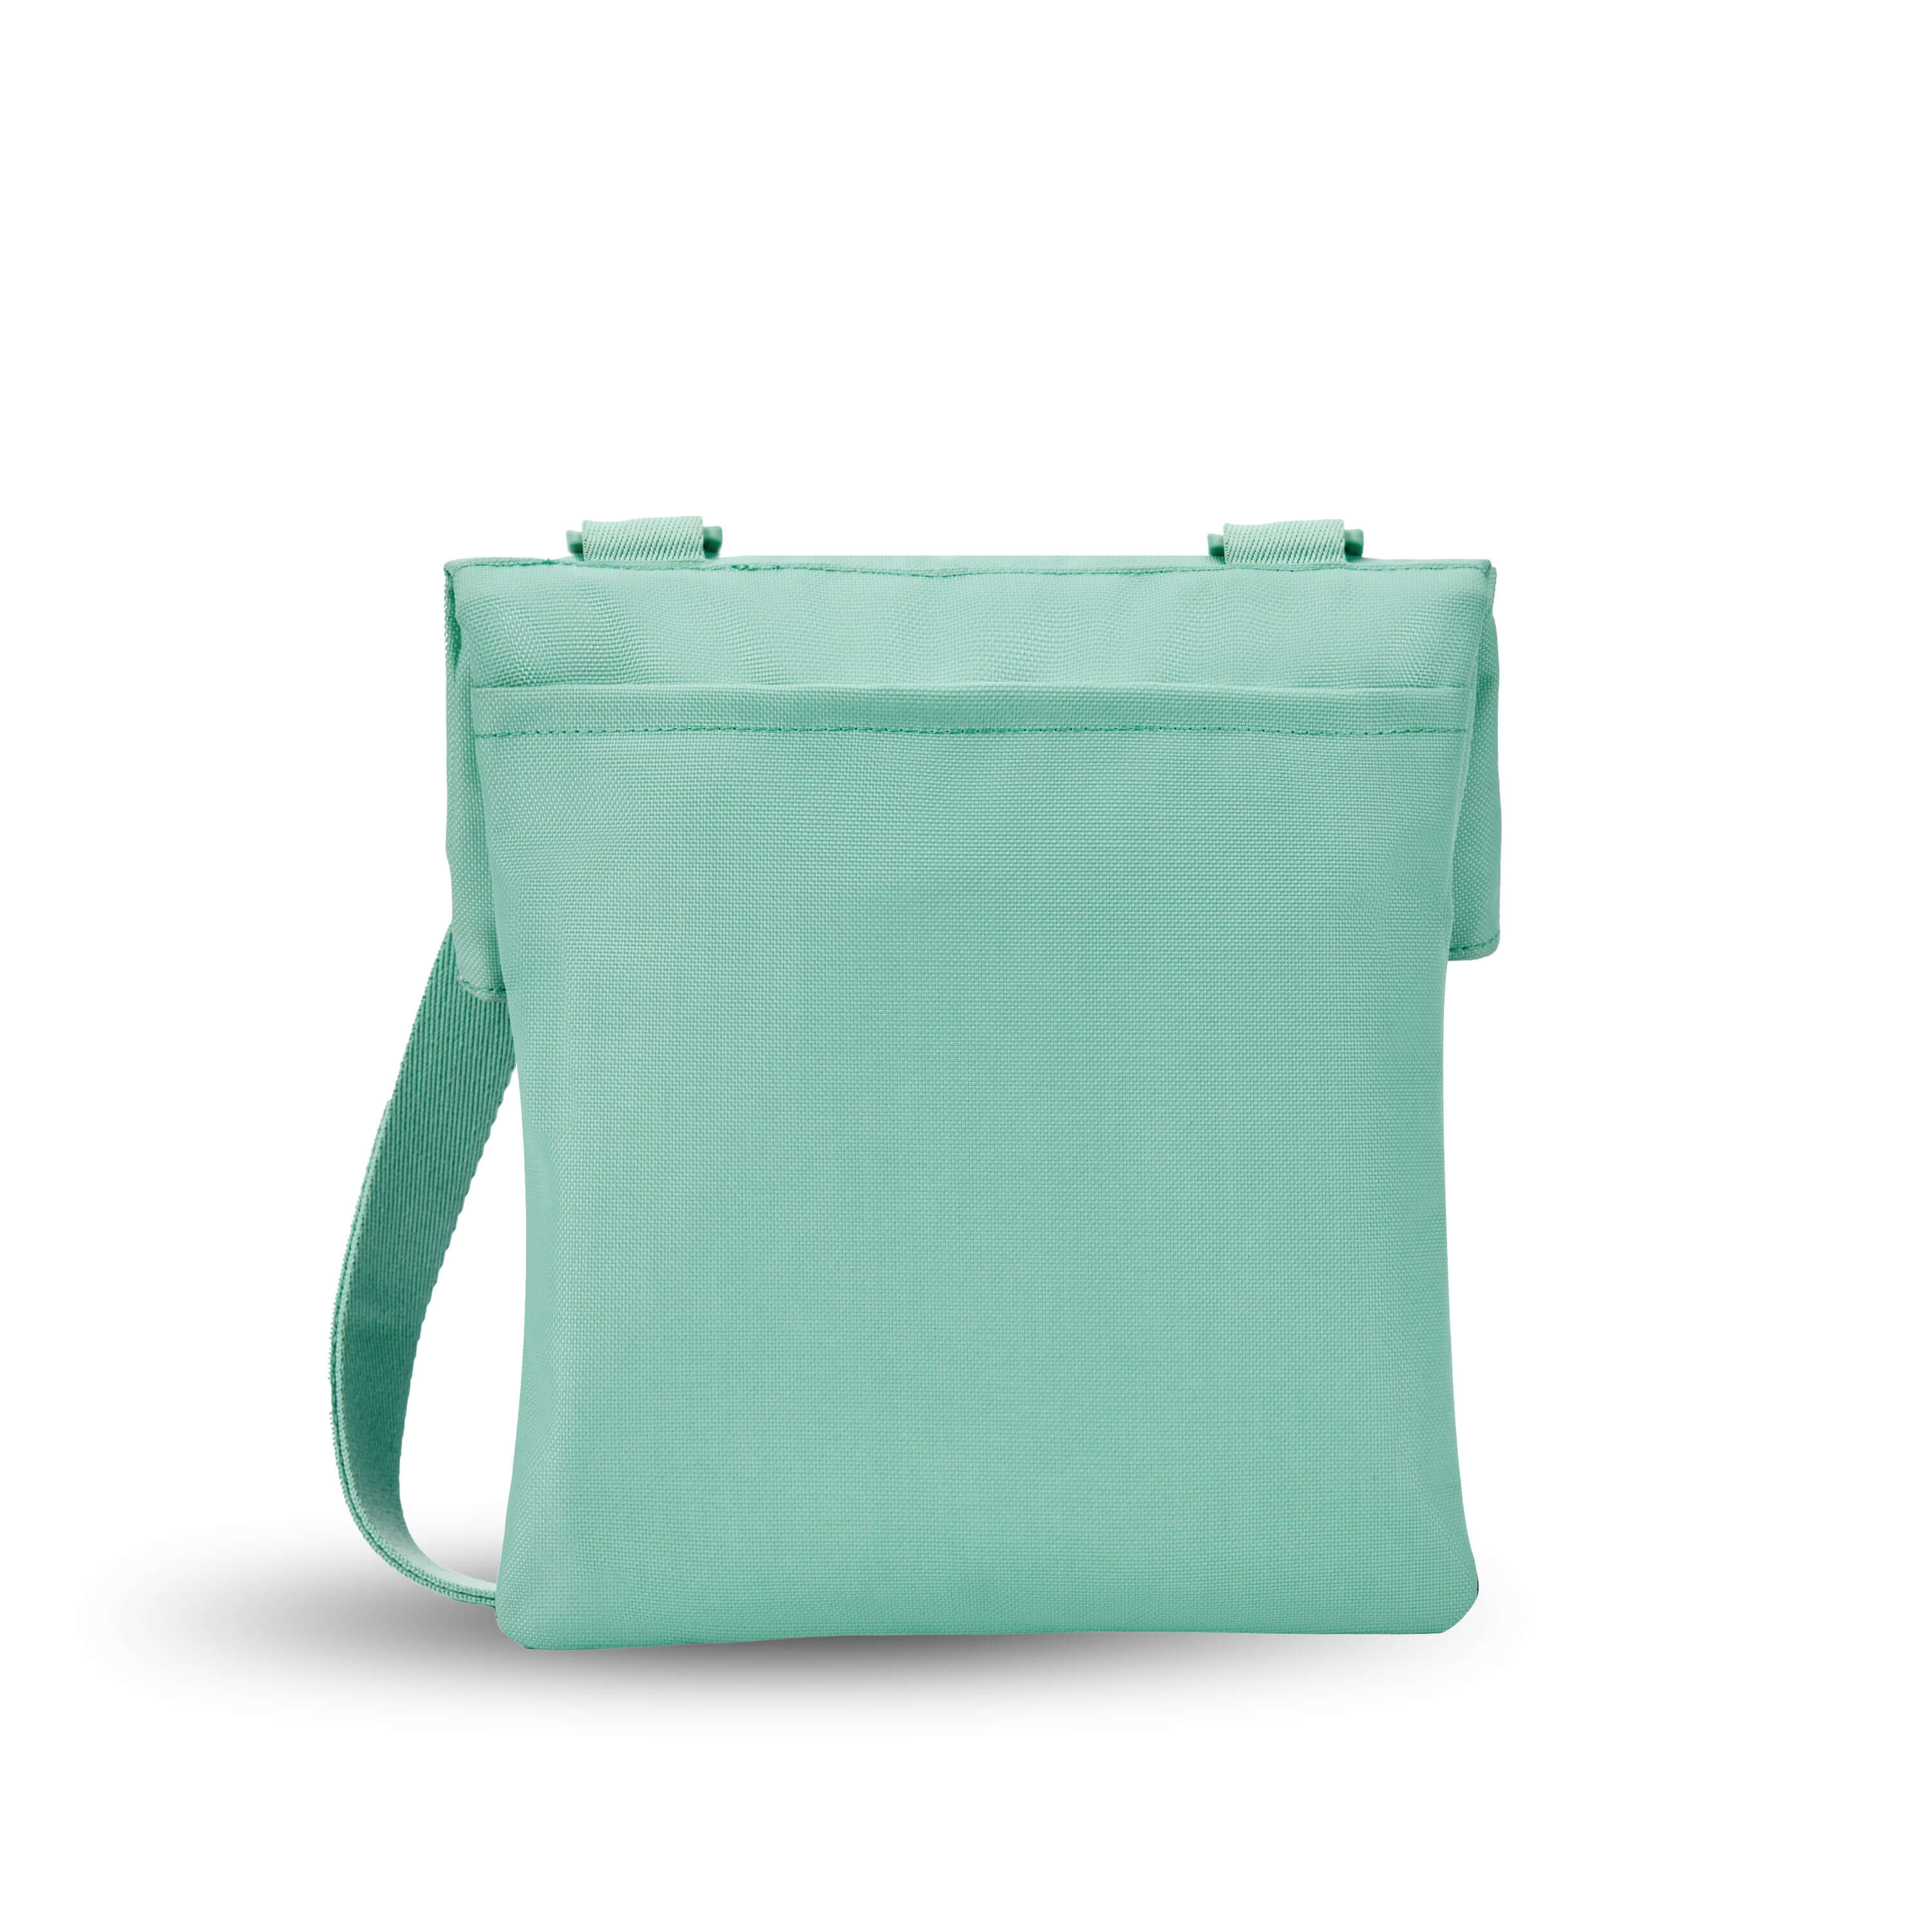 Back view of Sherpani crossbody, the Pica in Seagreen. The back of the bag features an external pouch.